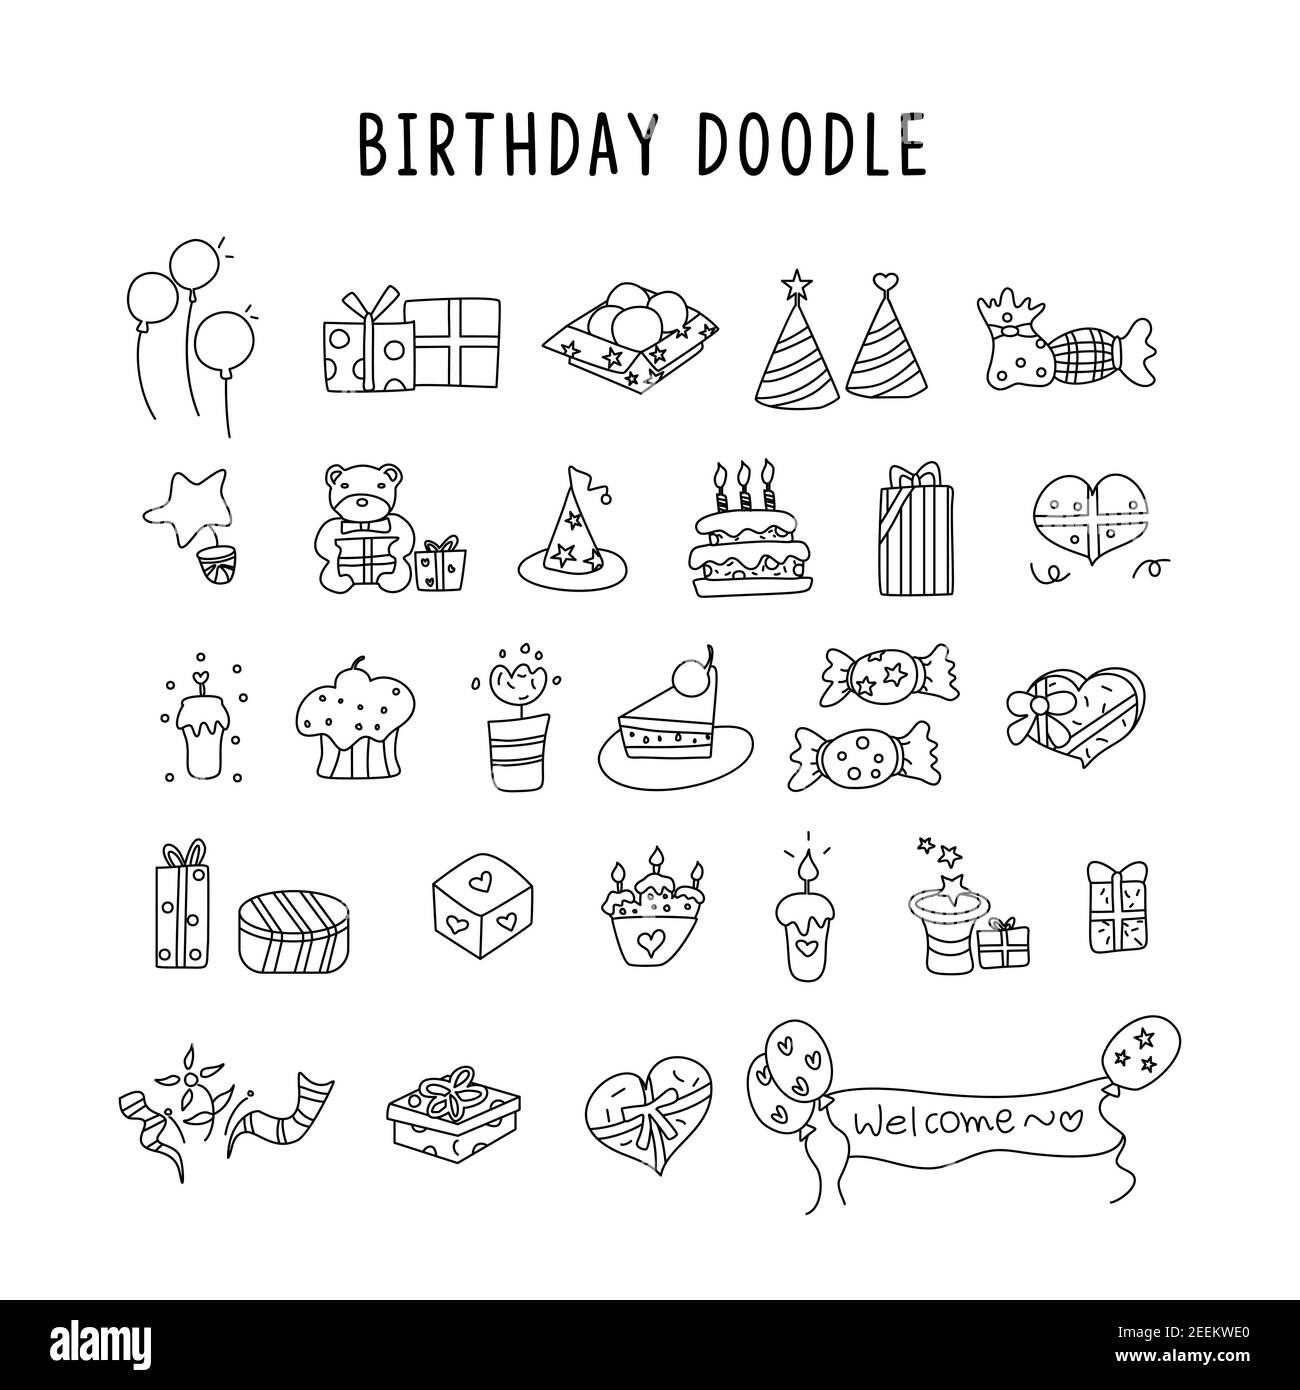 Birthday elements. Hand drawn set with birthday cakes, balloons, gift and festive attributes. Stock Vector